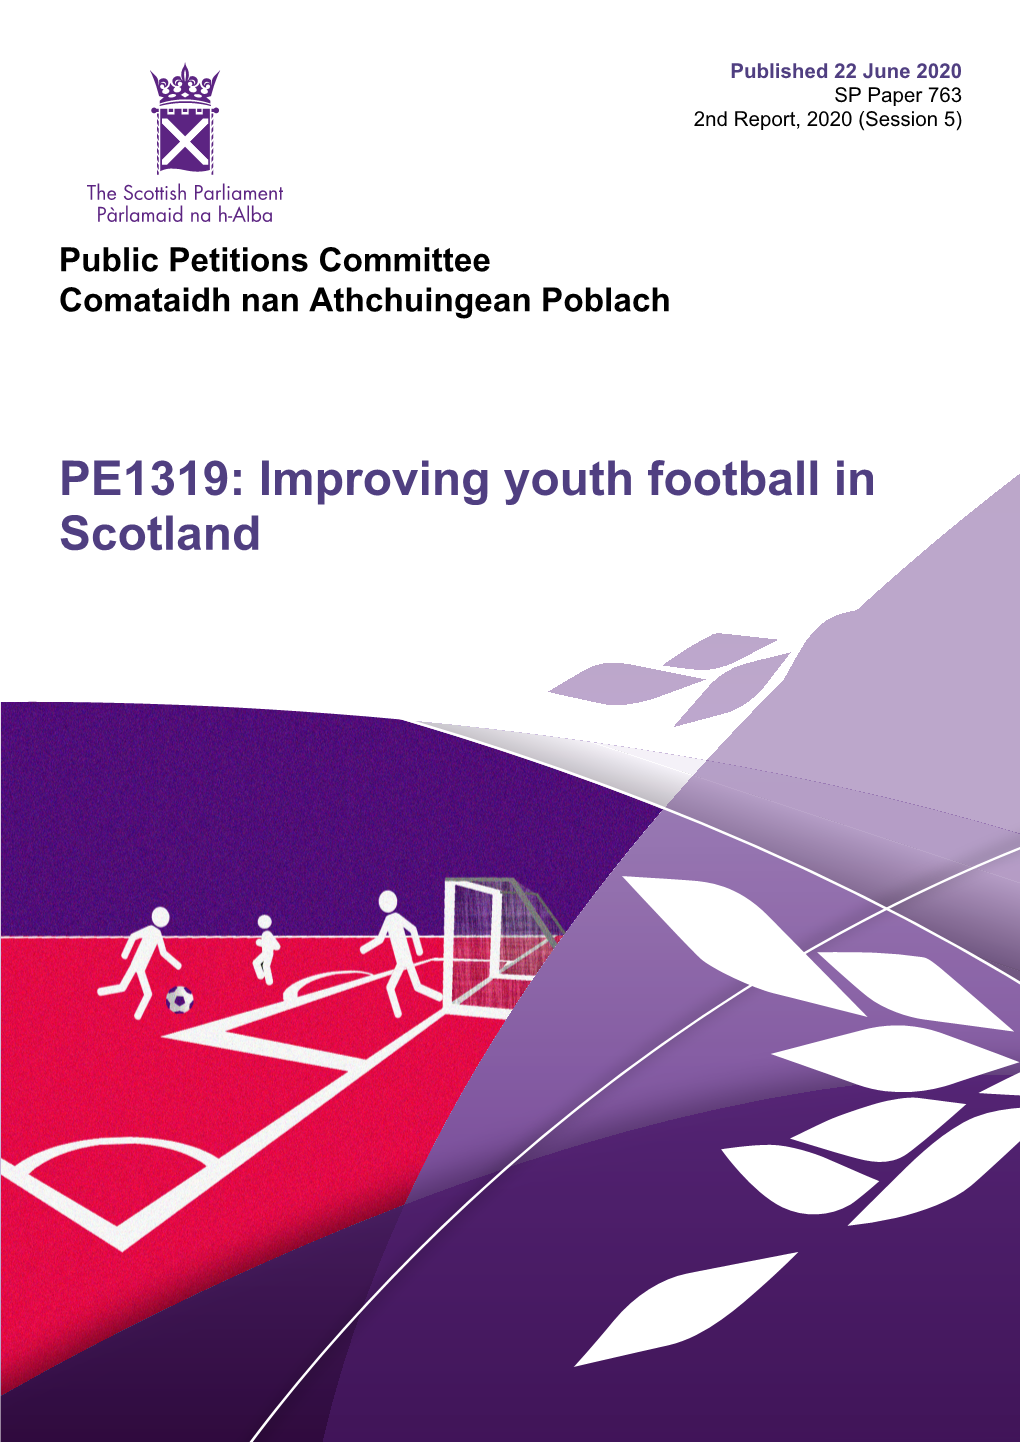 Report on Petition PE1319 by William Smith and Scott Robertson on Improving Youth Football in Scotland